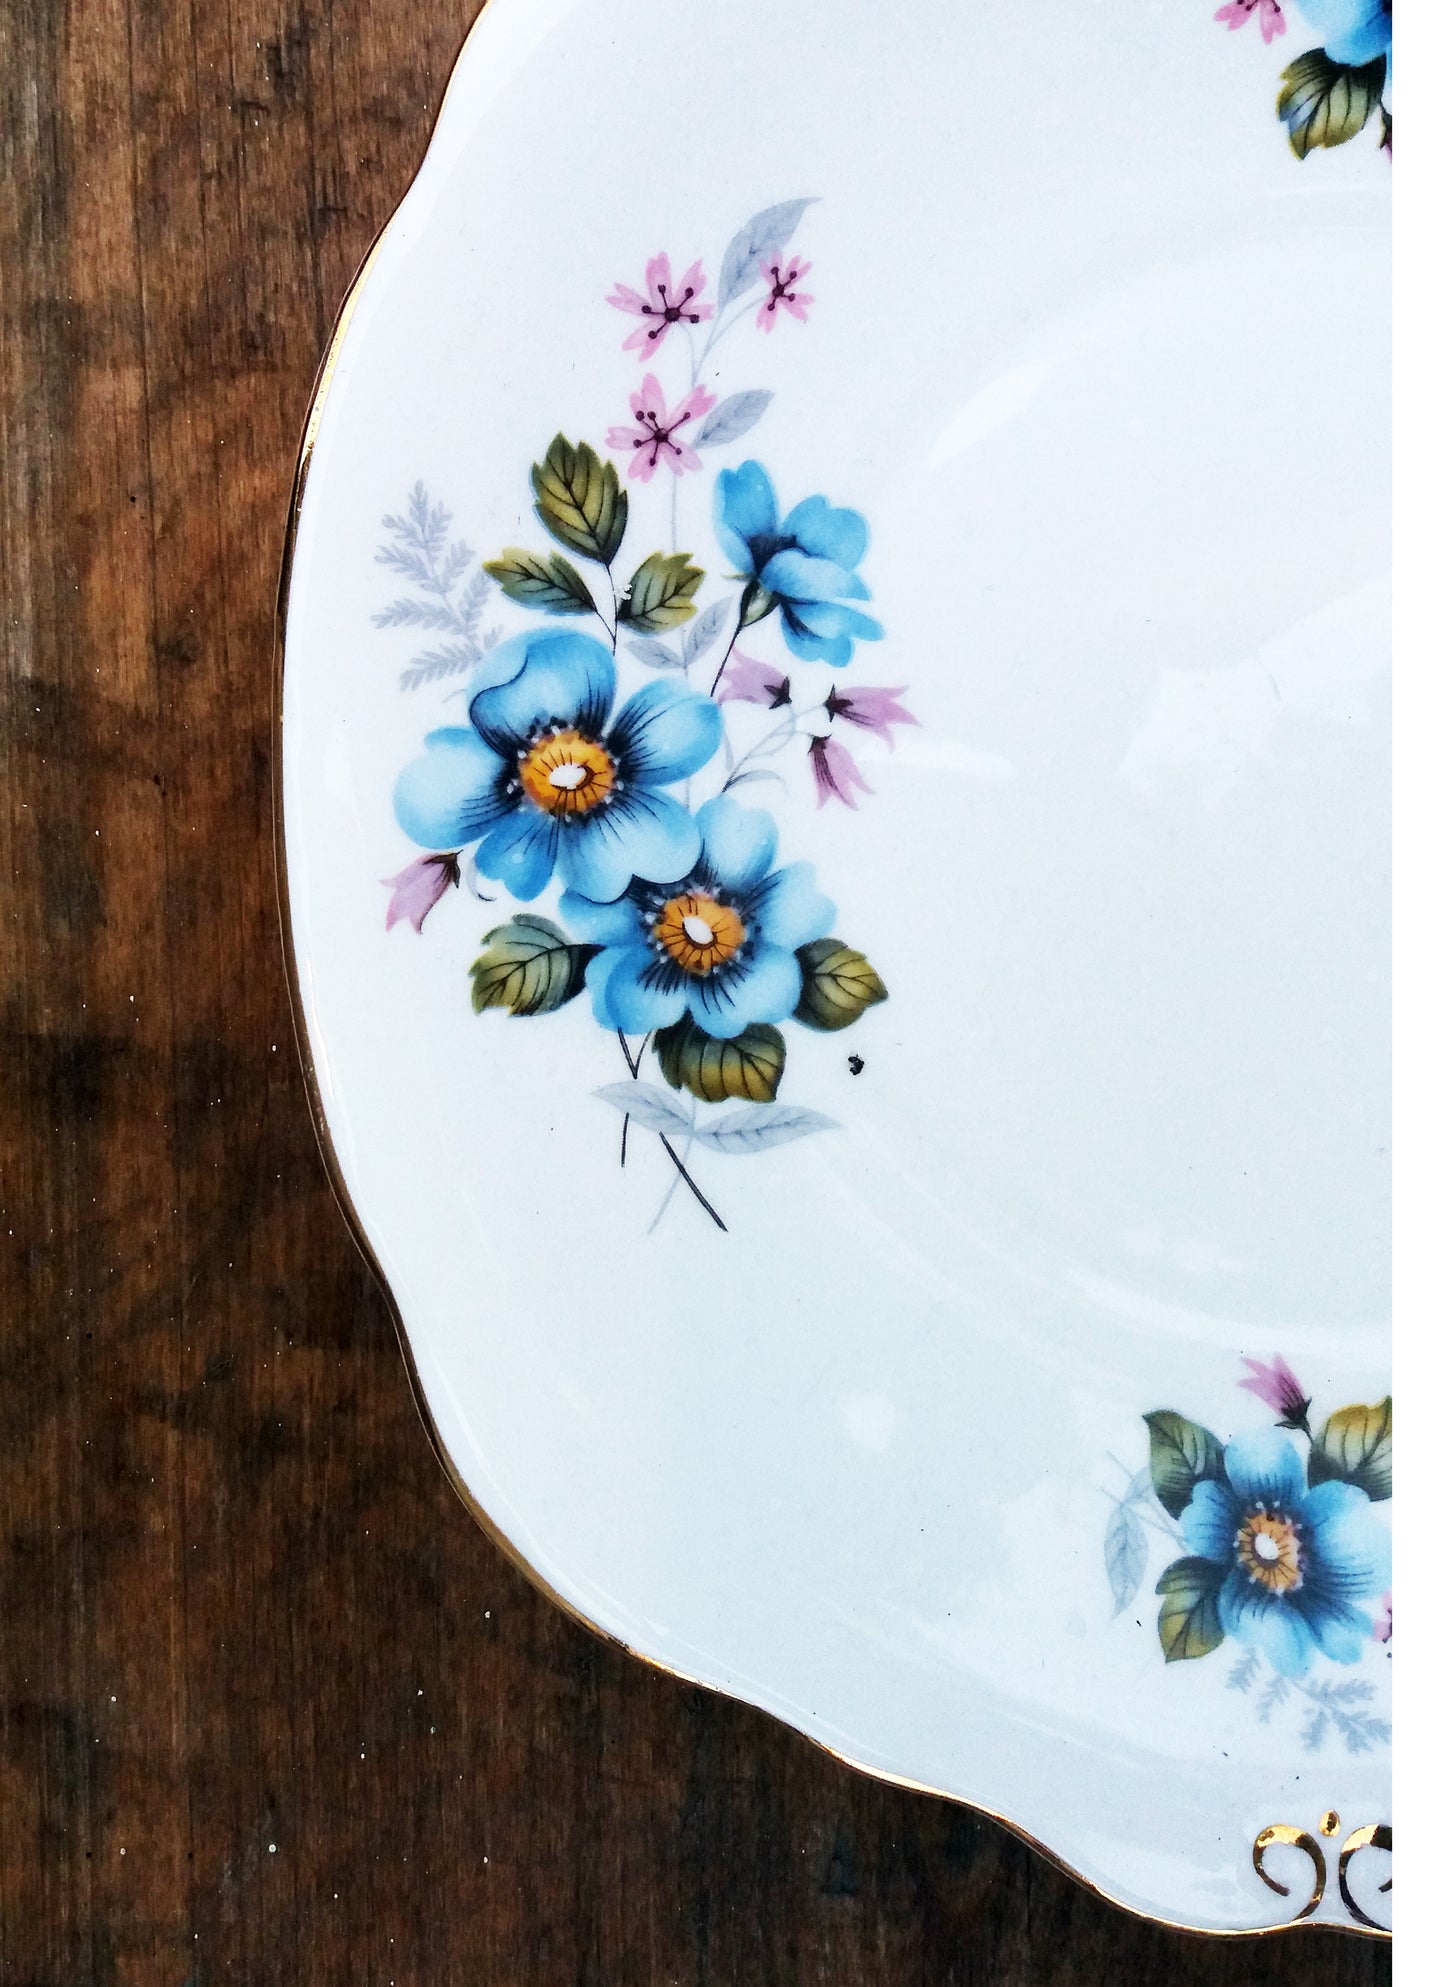 Shabby chic dinner plate with floral blue wild rose design in fine english bone china from Emily Rose Vintage